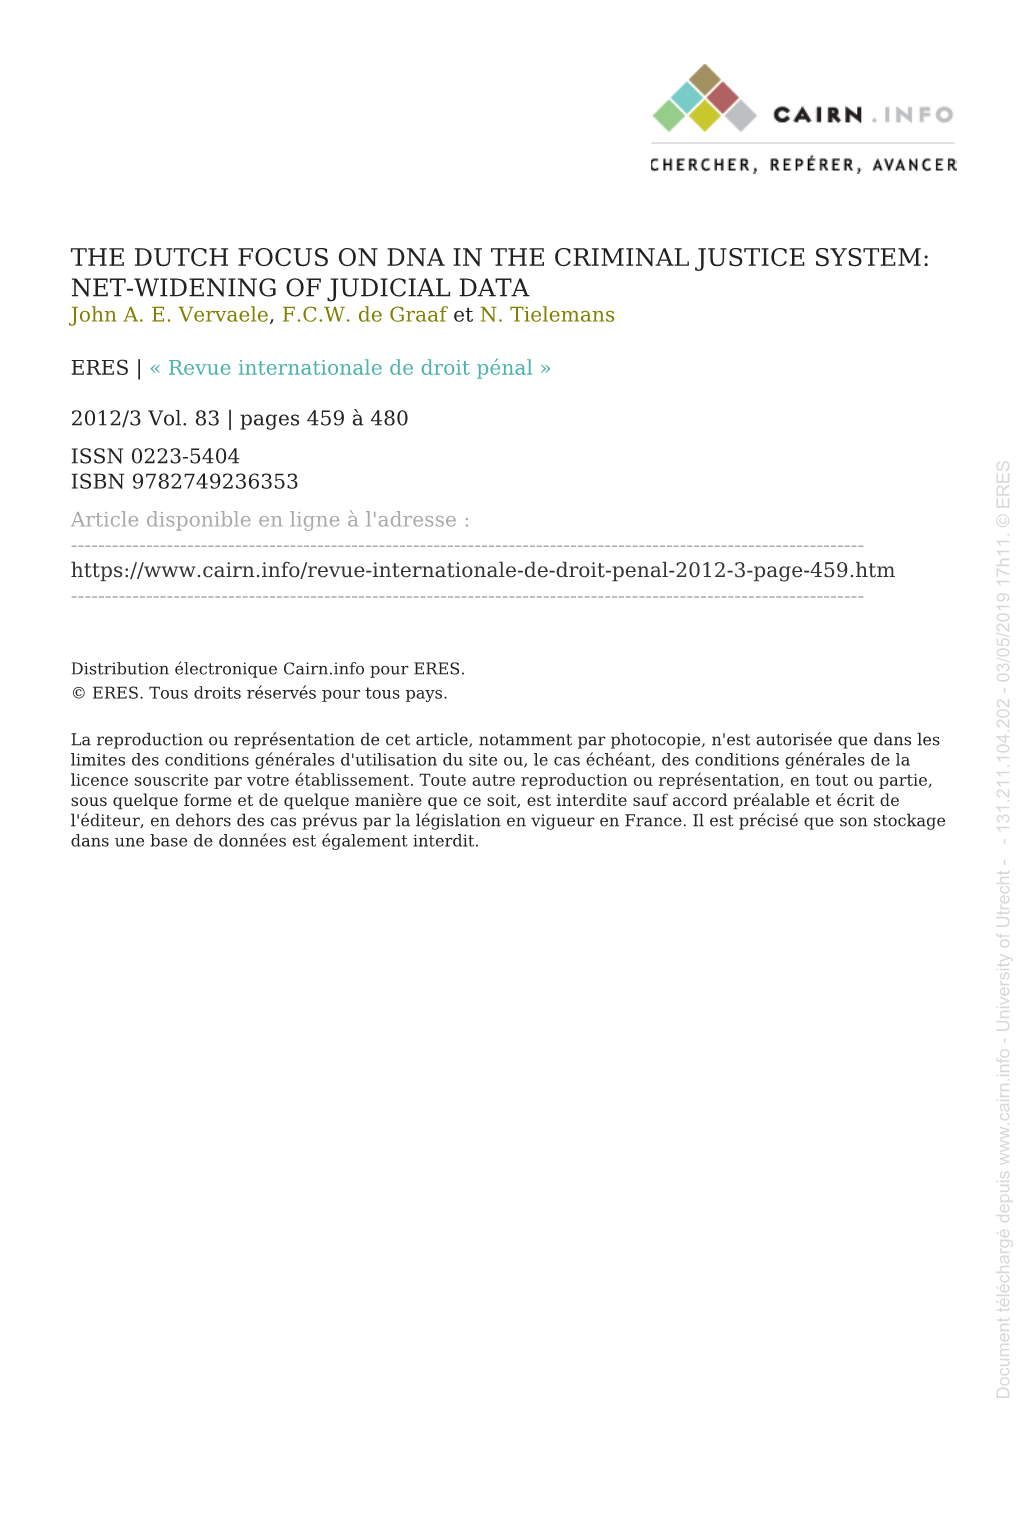 THE DUTCH FOCUS on DNA in the CRIMINAL JUSTICE SYSTEM: NET-WIDENING of JUDICIAL DATA John A